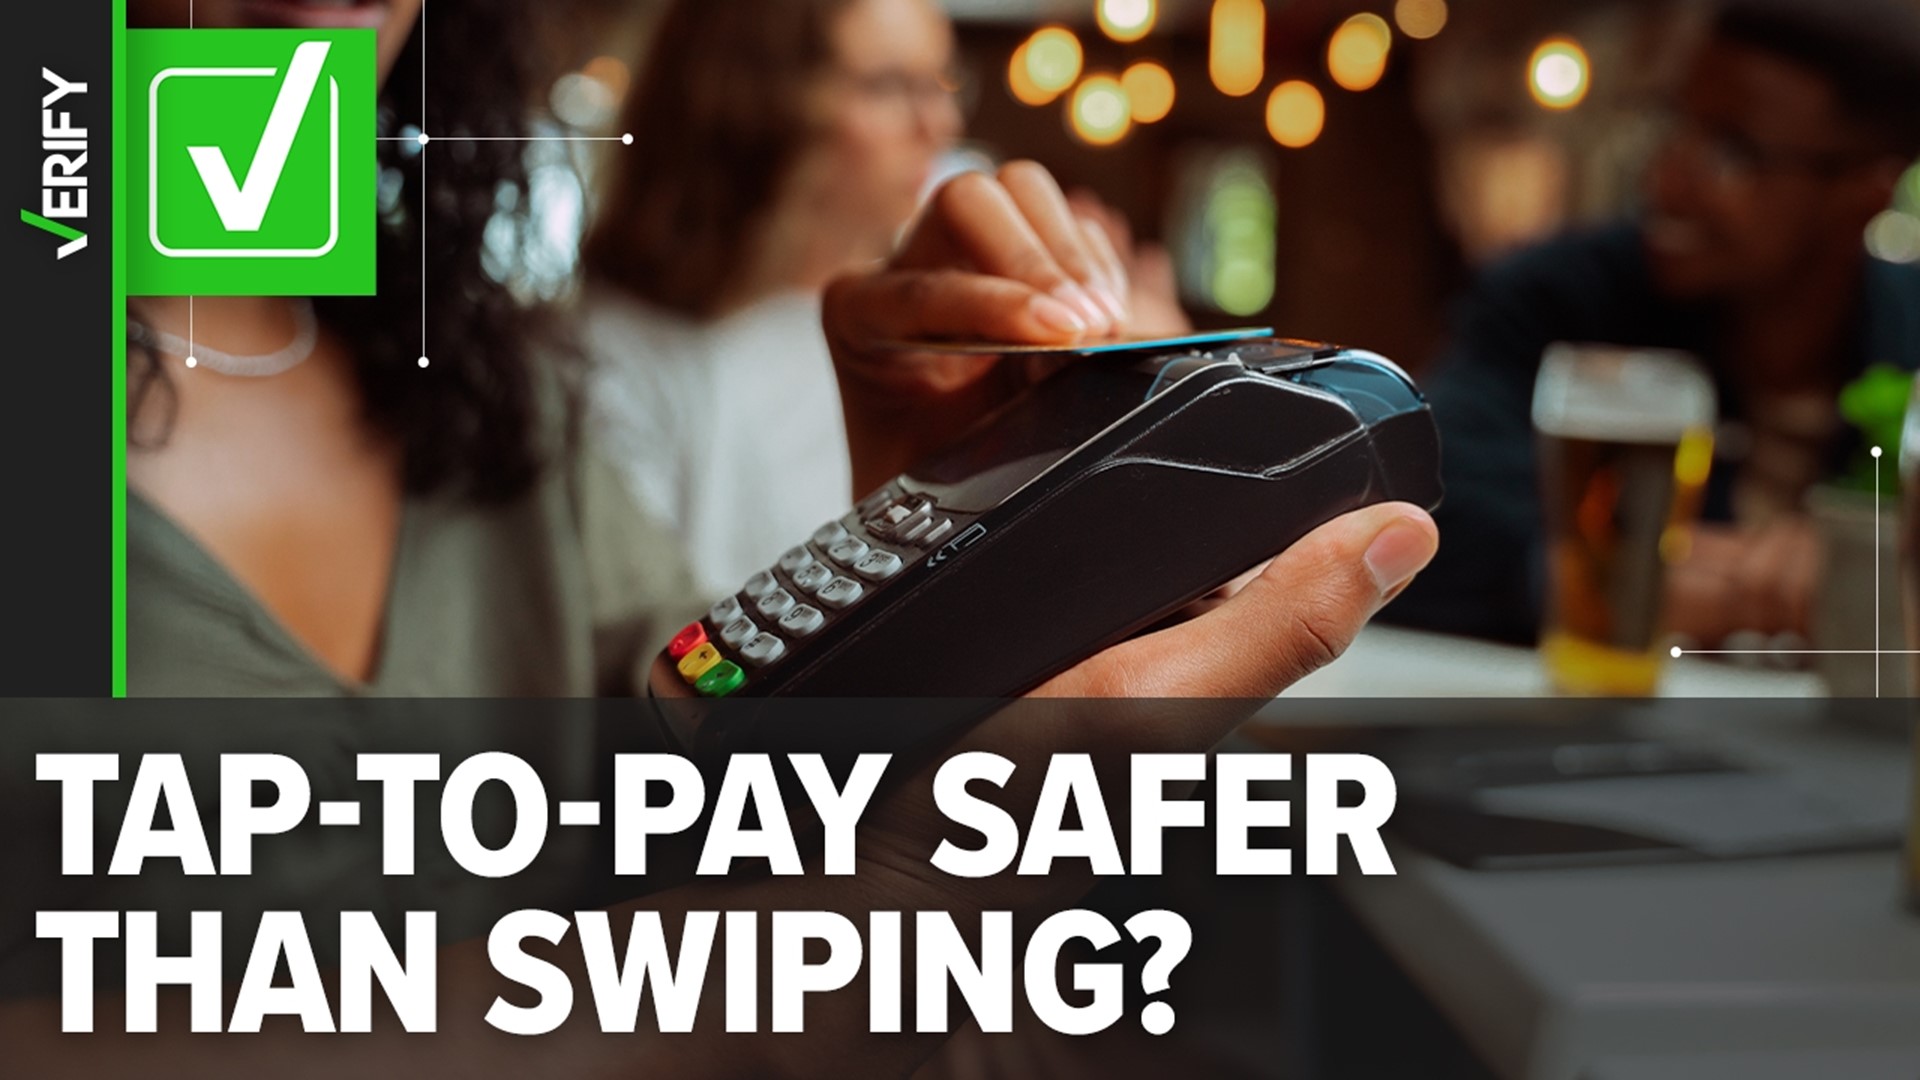 Tap-to-pay, contactless credit cards are better protected from card skimmers sometimes present on gas pumps and ATMs than other credit and debit cards are.